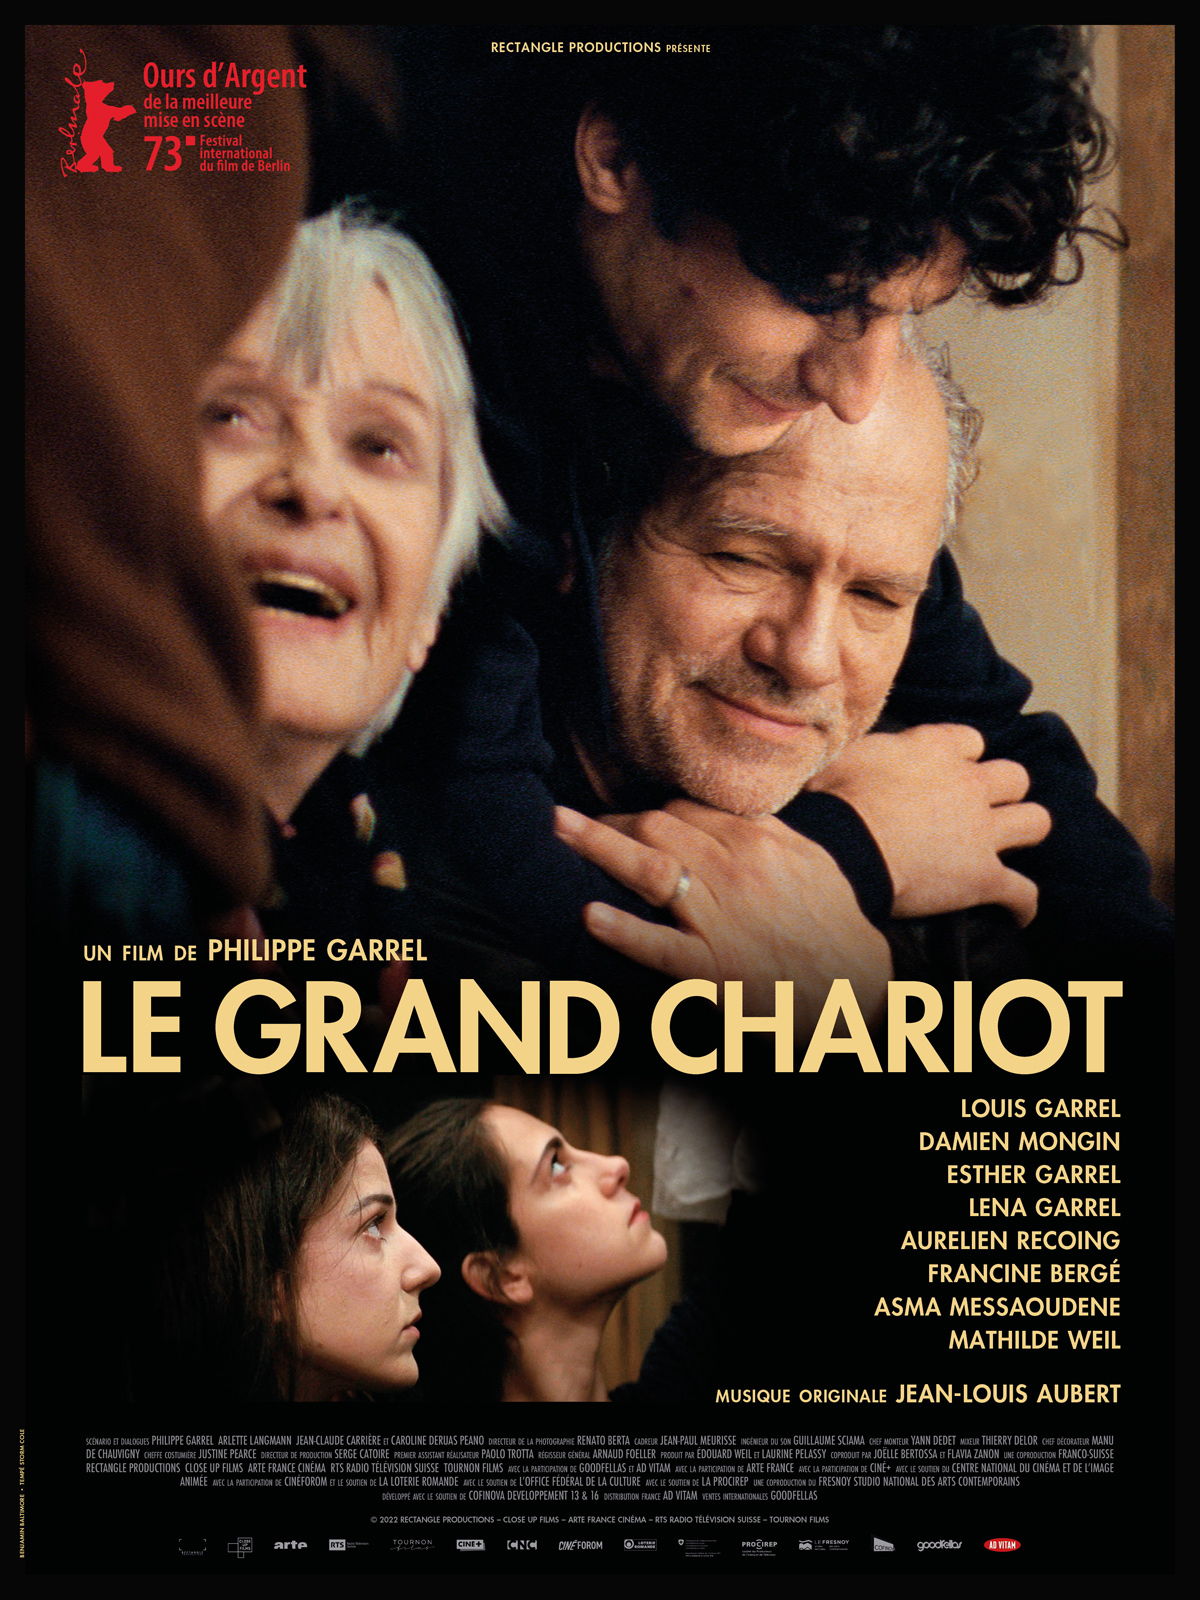 Le Grand chariot